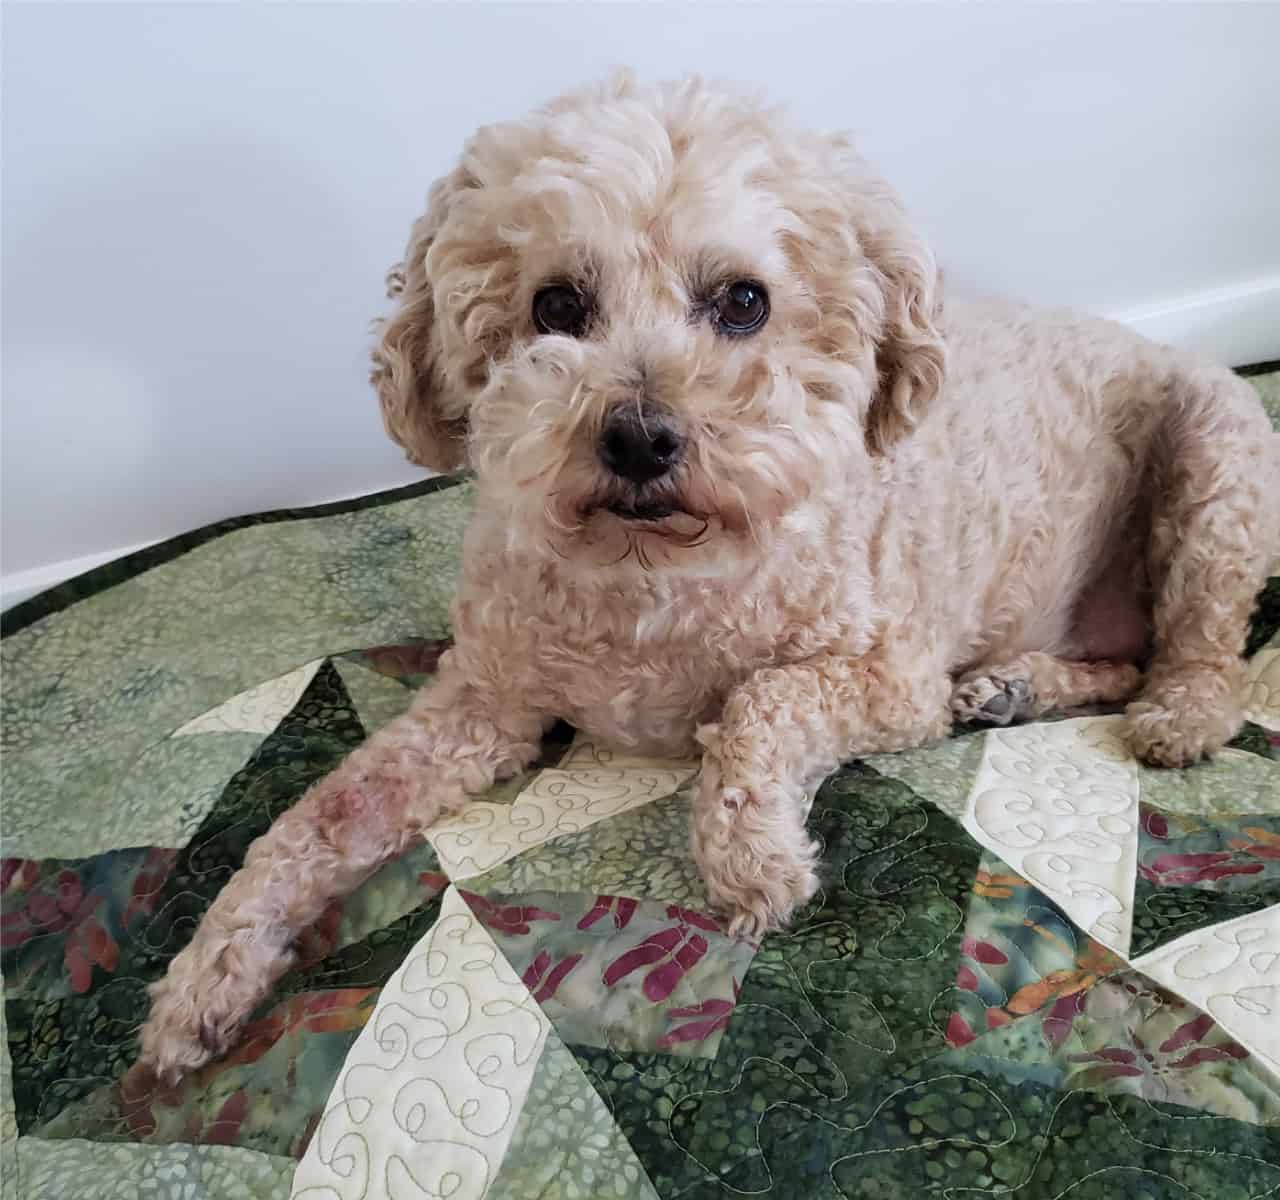 Closeup of Mr. Mickey the miniature poodle on the quilt